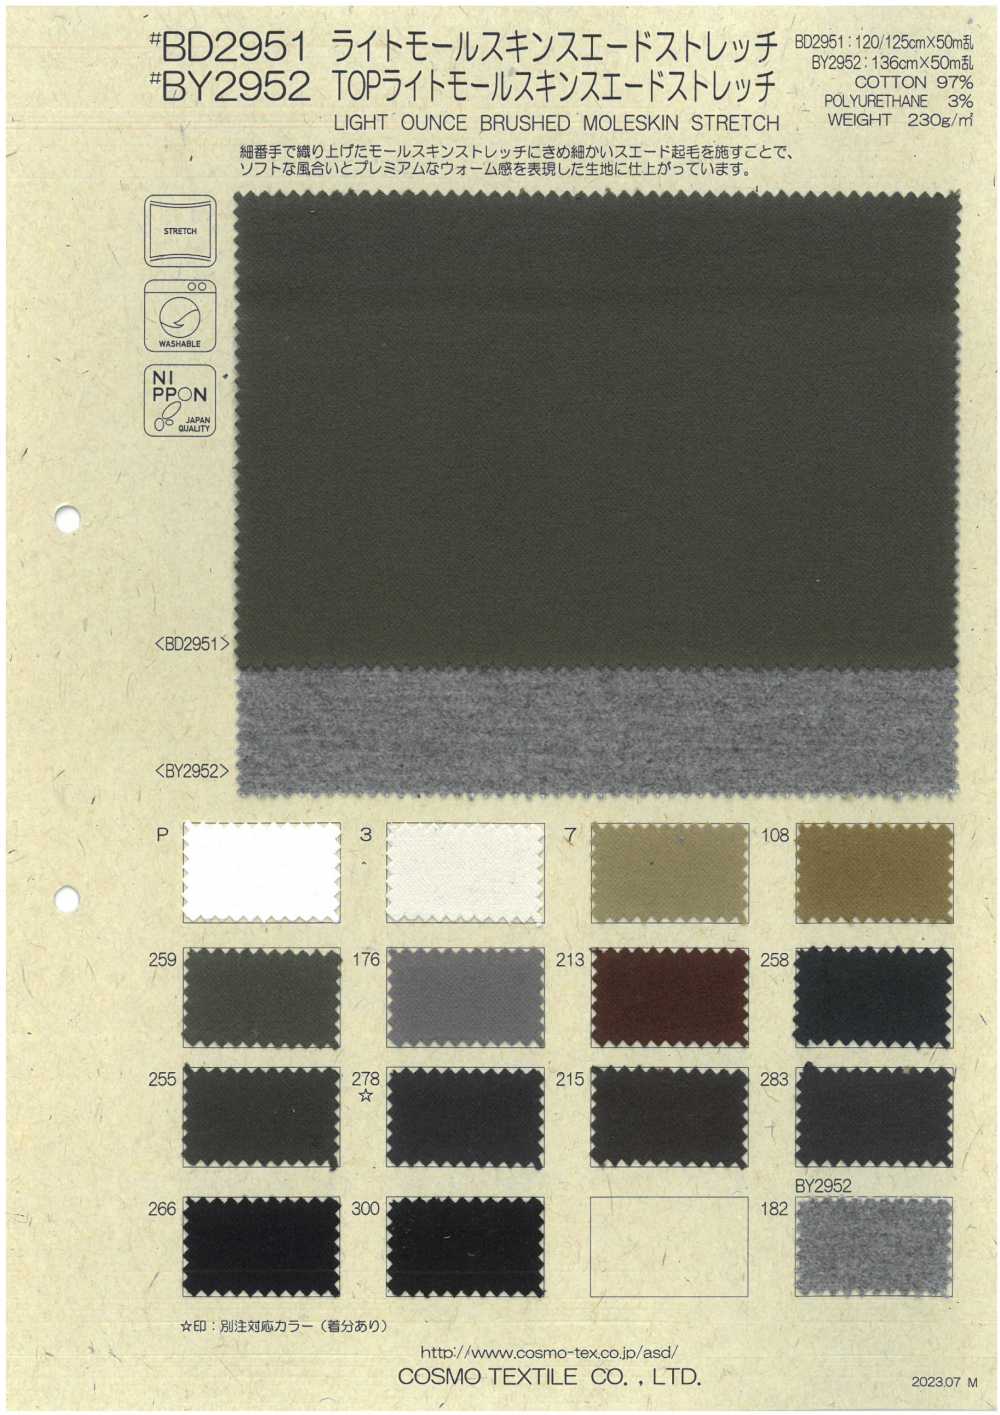 BD2951 Light Moleskin Stretch PTJ Recommended Part Number[Textile] COSMO TEXTILE